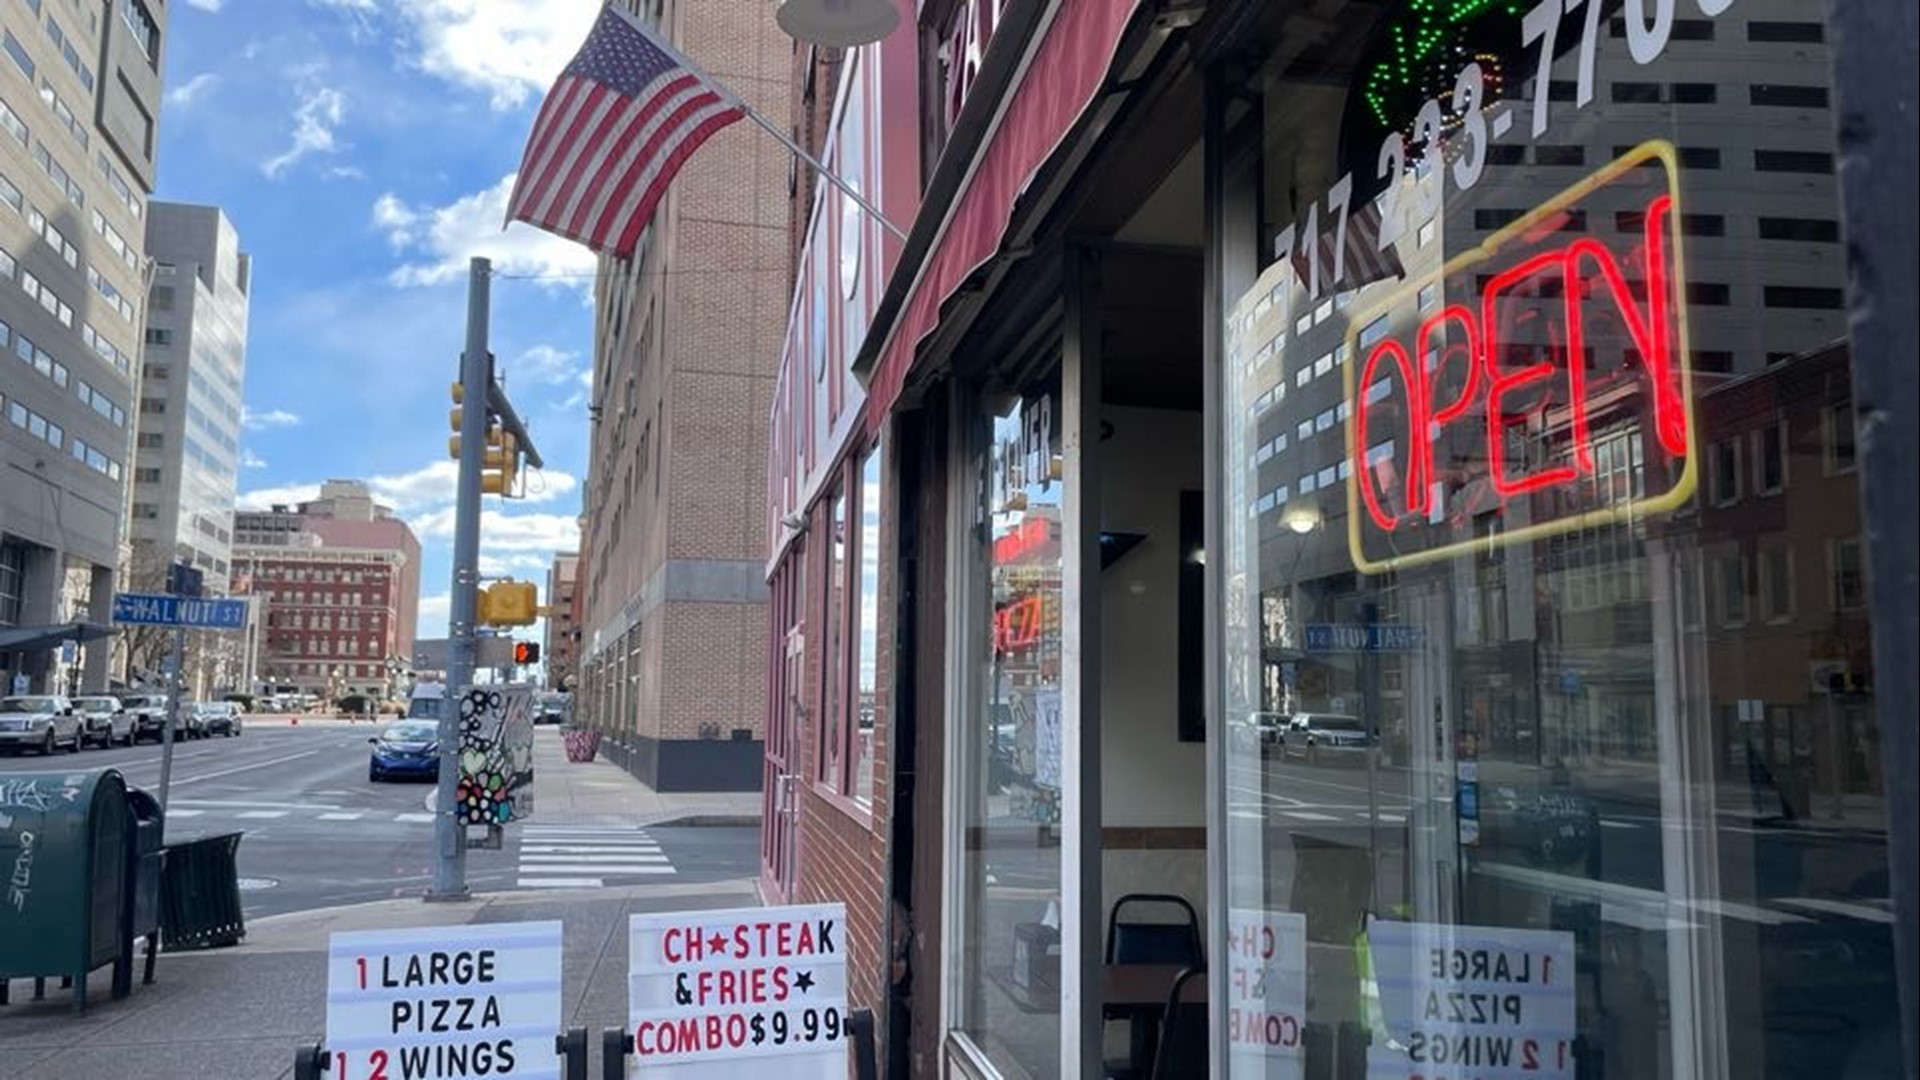 The announcement is welcome news for Harrisburg’s restaurants, which have suffered losses since the COVID-19 pandemic emptied office buildings.